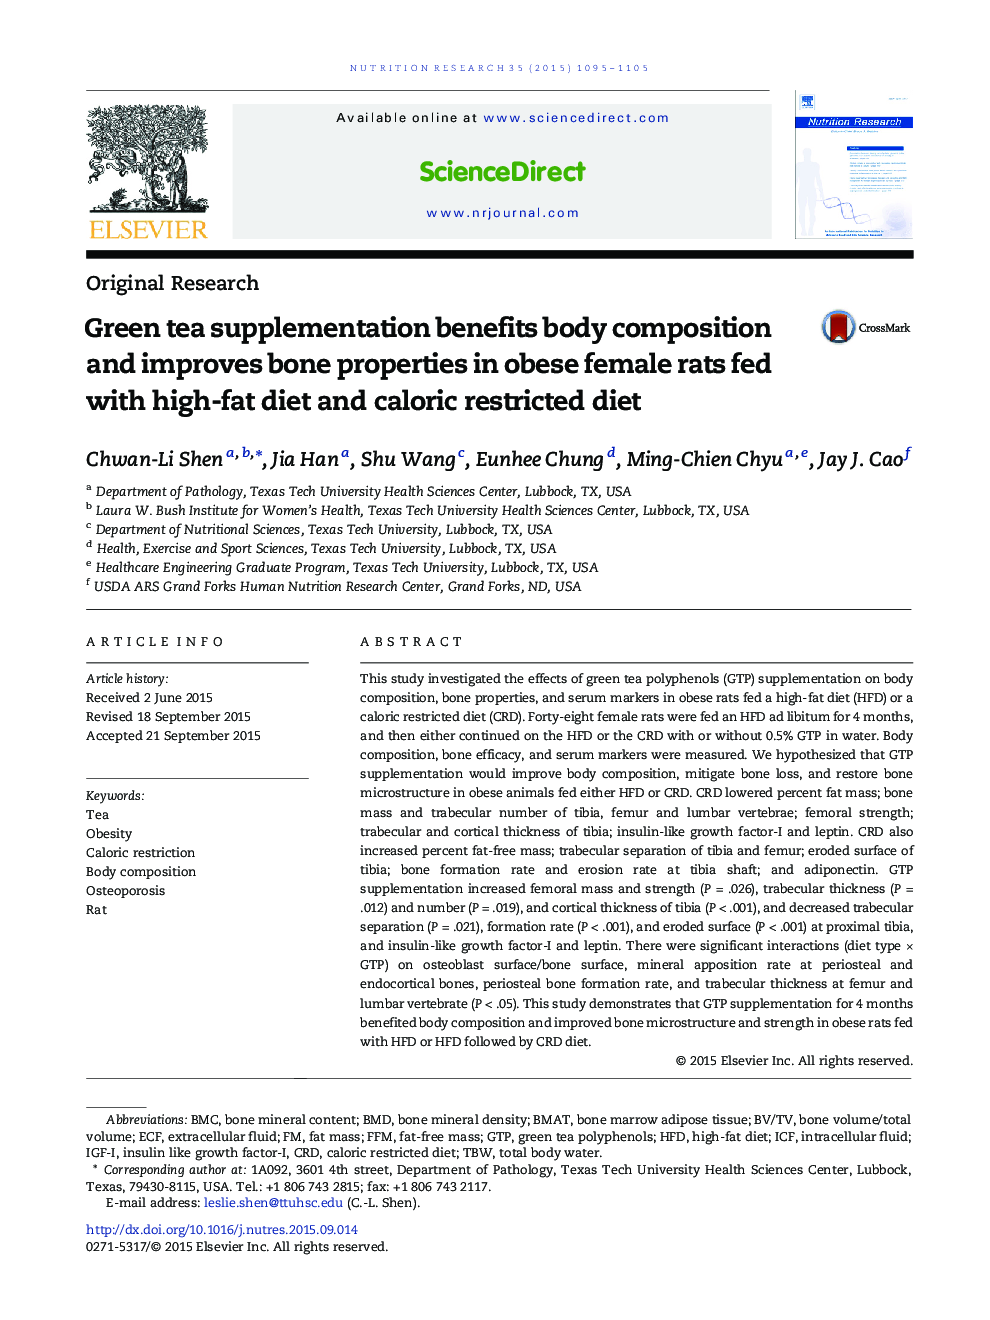 Green tea supplementation benefits body composition and improves bone properties in obese female rats fed with high-fat diet and caloric restricted diet